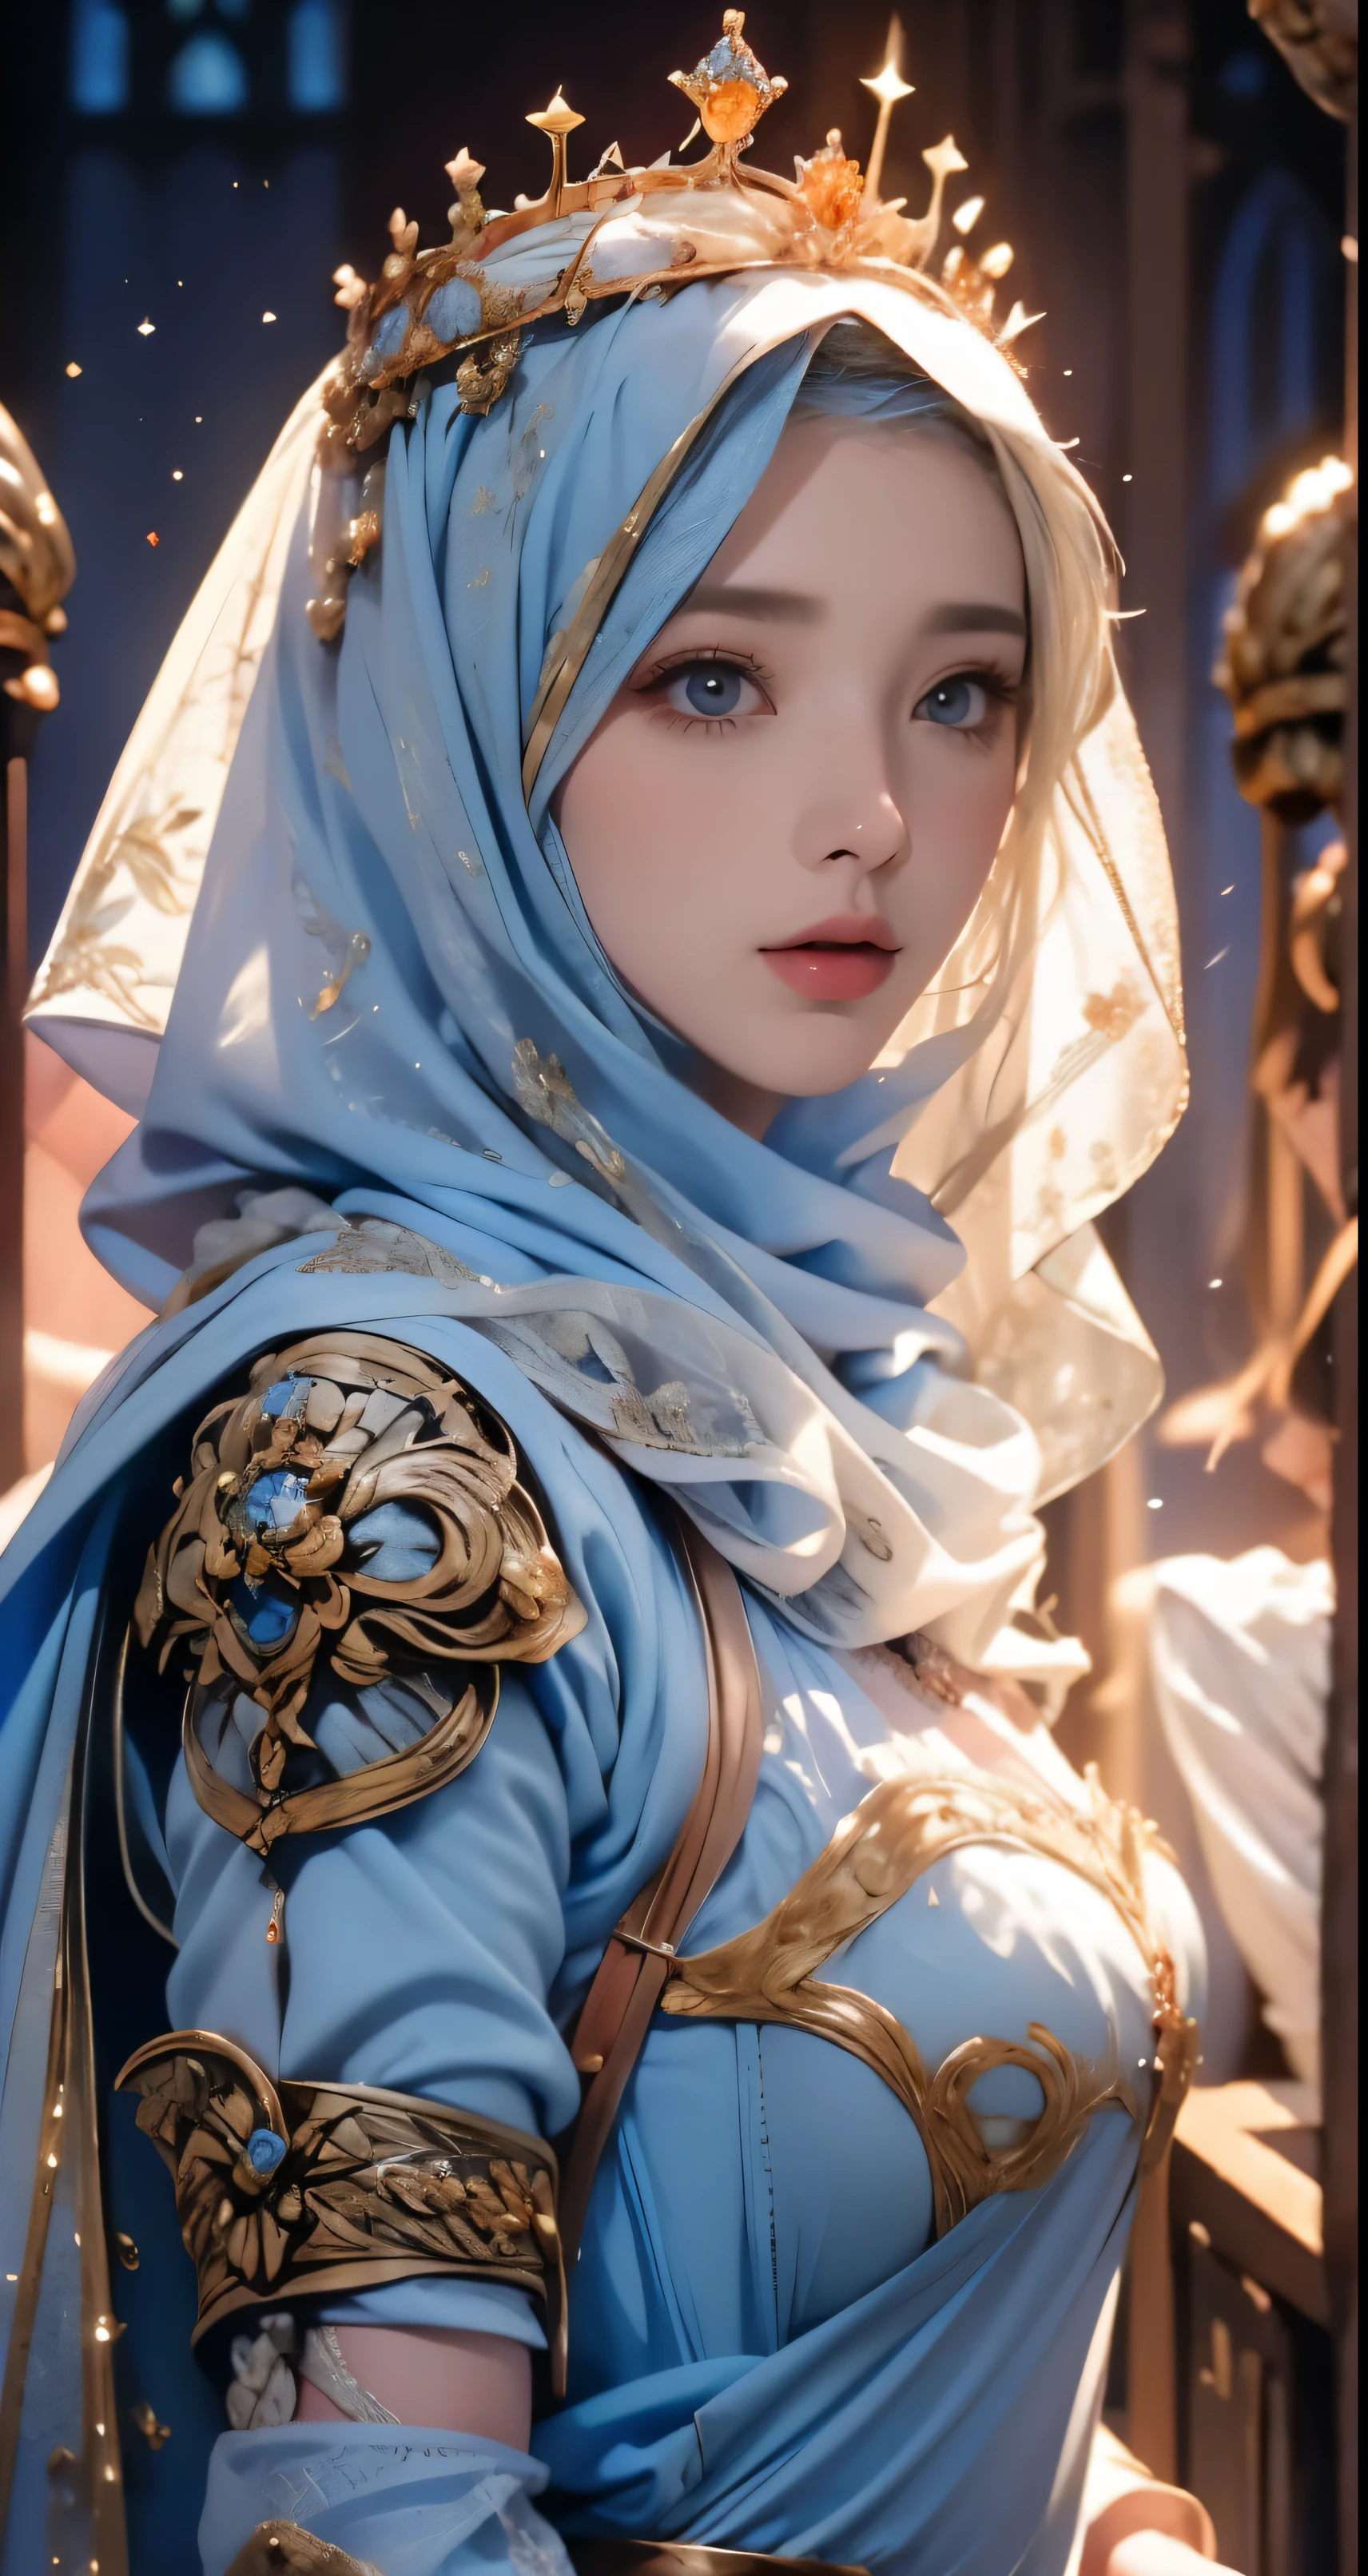 Erect nipples, wearing a hijab , luxury hijab,crown luxury , blue eye, blond hair, around 17 years old, (gold ), tmasterpiece，Best quality at best，A high resolution，8K，((Portrait))，(upper body)，Original photo，real photograph，digital photography，(Female princess in the medieval fantasy style), sexy princess ，blue eye， super colossal breast, round colossal breast ，open kissing lips，Keep your mouth shuegant and charming，((Blushing))，virgin contempt，Calm and handsome，(Medieval fantasy dress，The Beautiful super huge round breast, small waist, perfect colossal breast of princess body, a blue delicate pattern，silver Cloak)，(princes medieval character medieval fantasy style，oc render reflection texture, fighting style,  sexy colossal breast , medieval castle background, slim body, very small waist, 